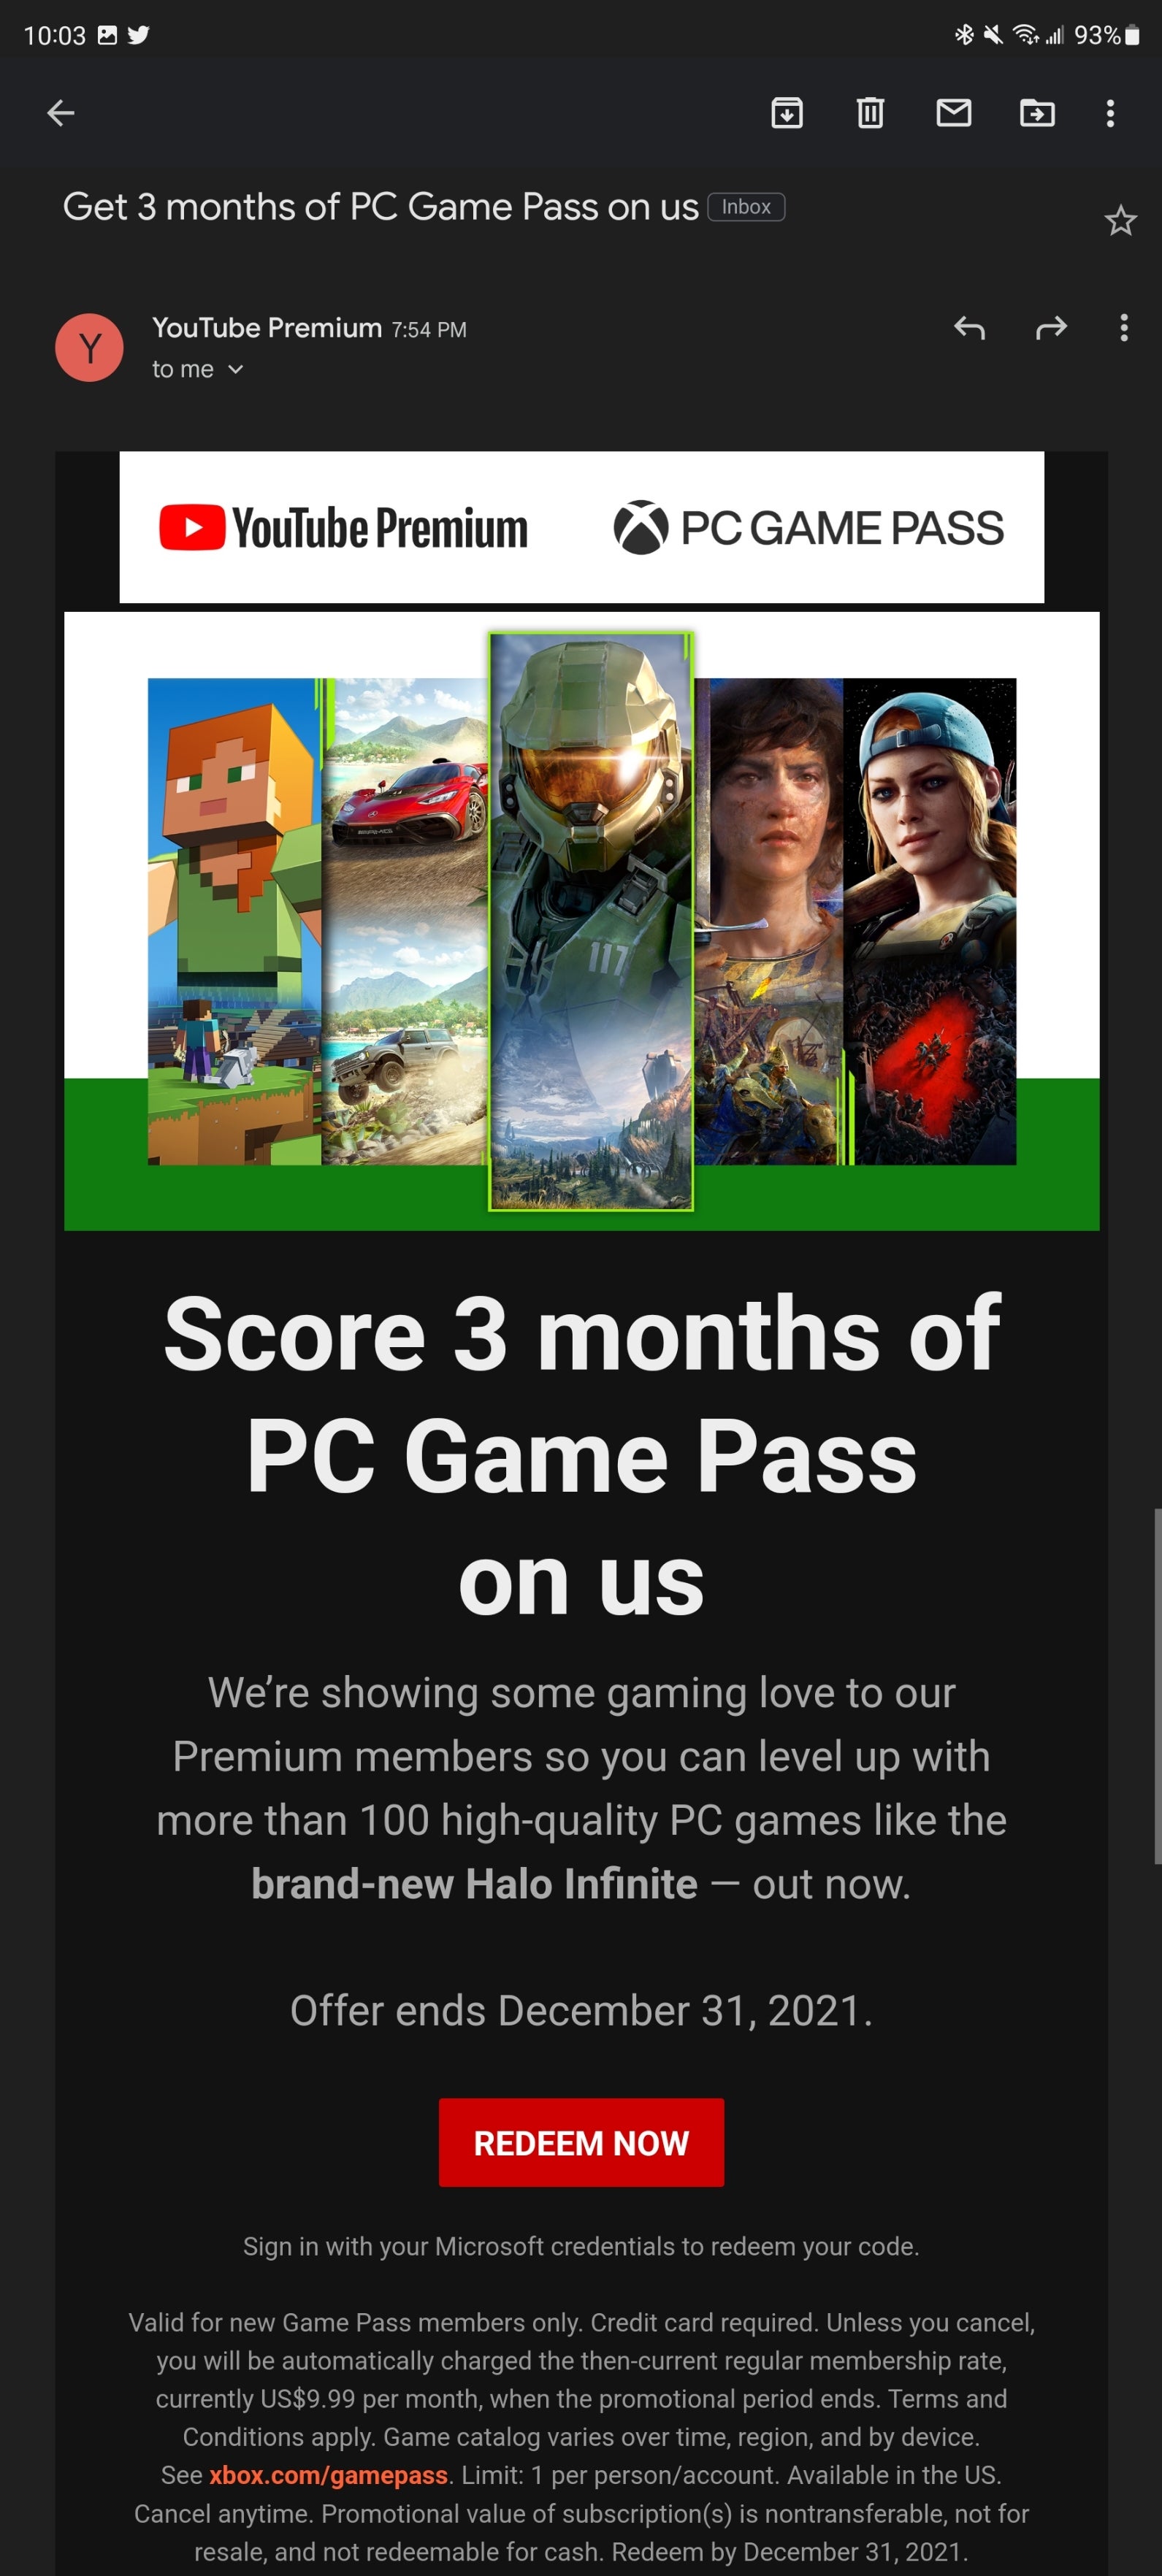 YouTube Premium now gets you 3 months of Microsoft’s ‘PC Game Pass’ for free